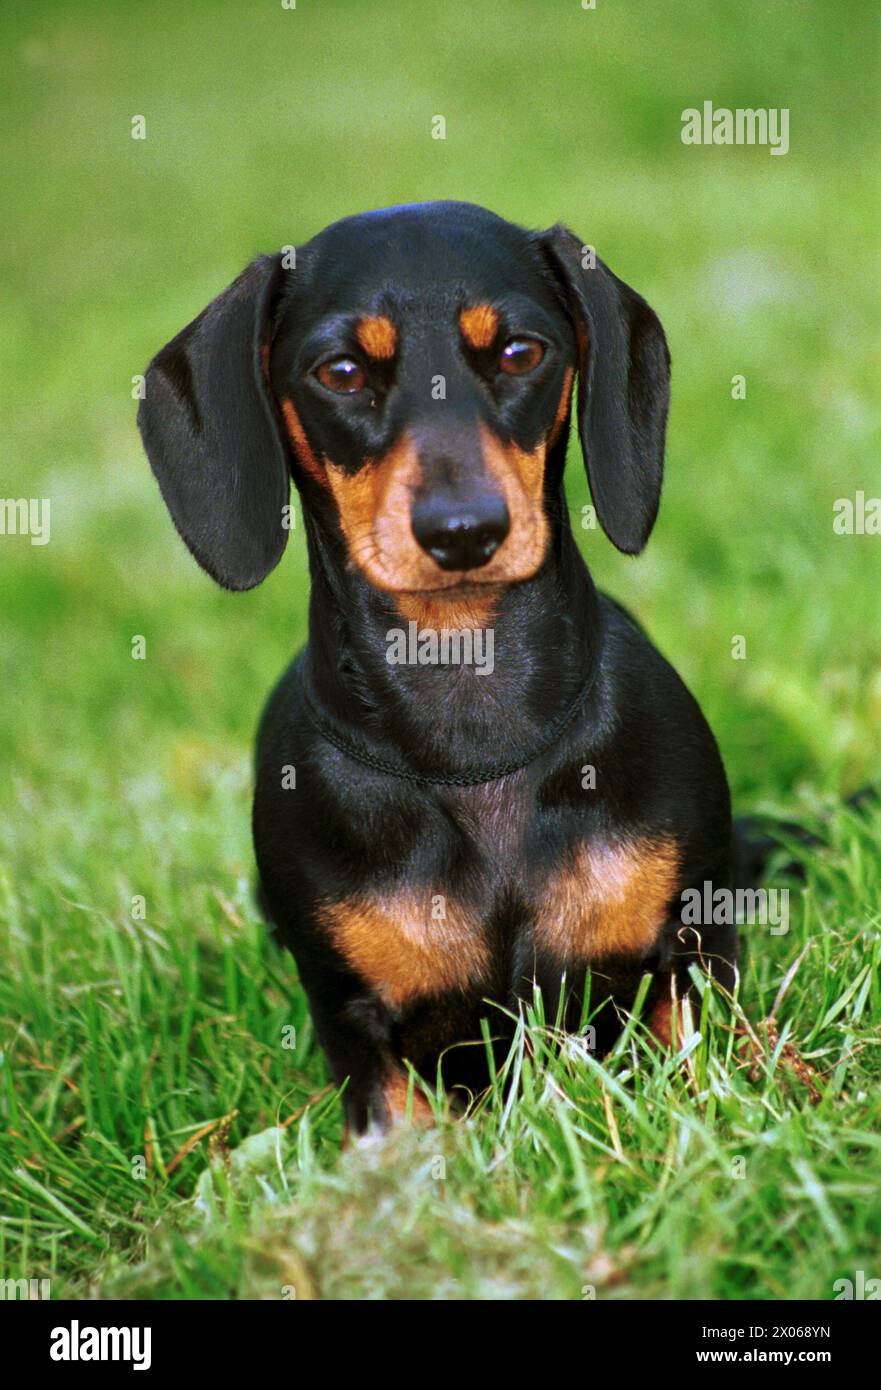 Miniature Smooth Haired Dachshund Black and Tan Facing Camera Stock Photo